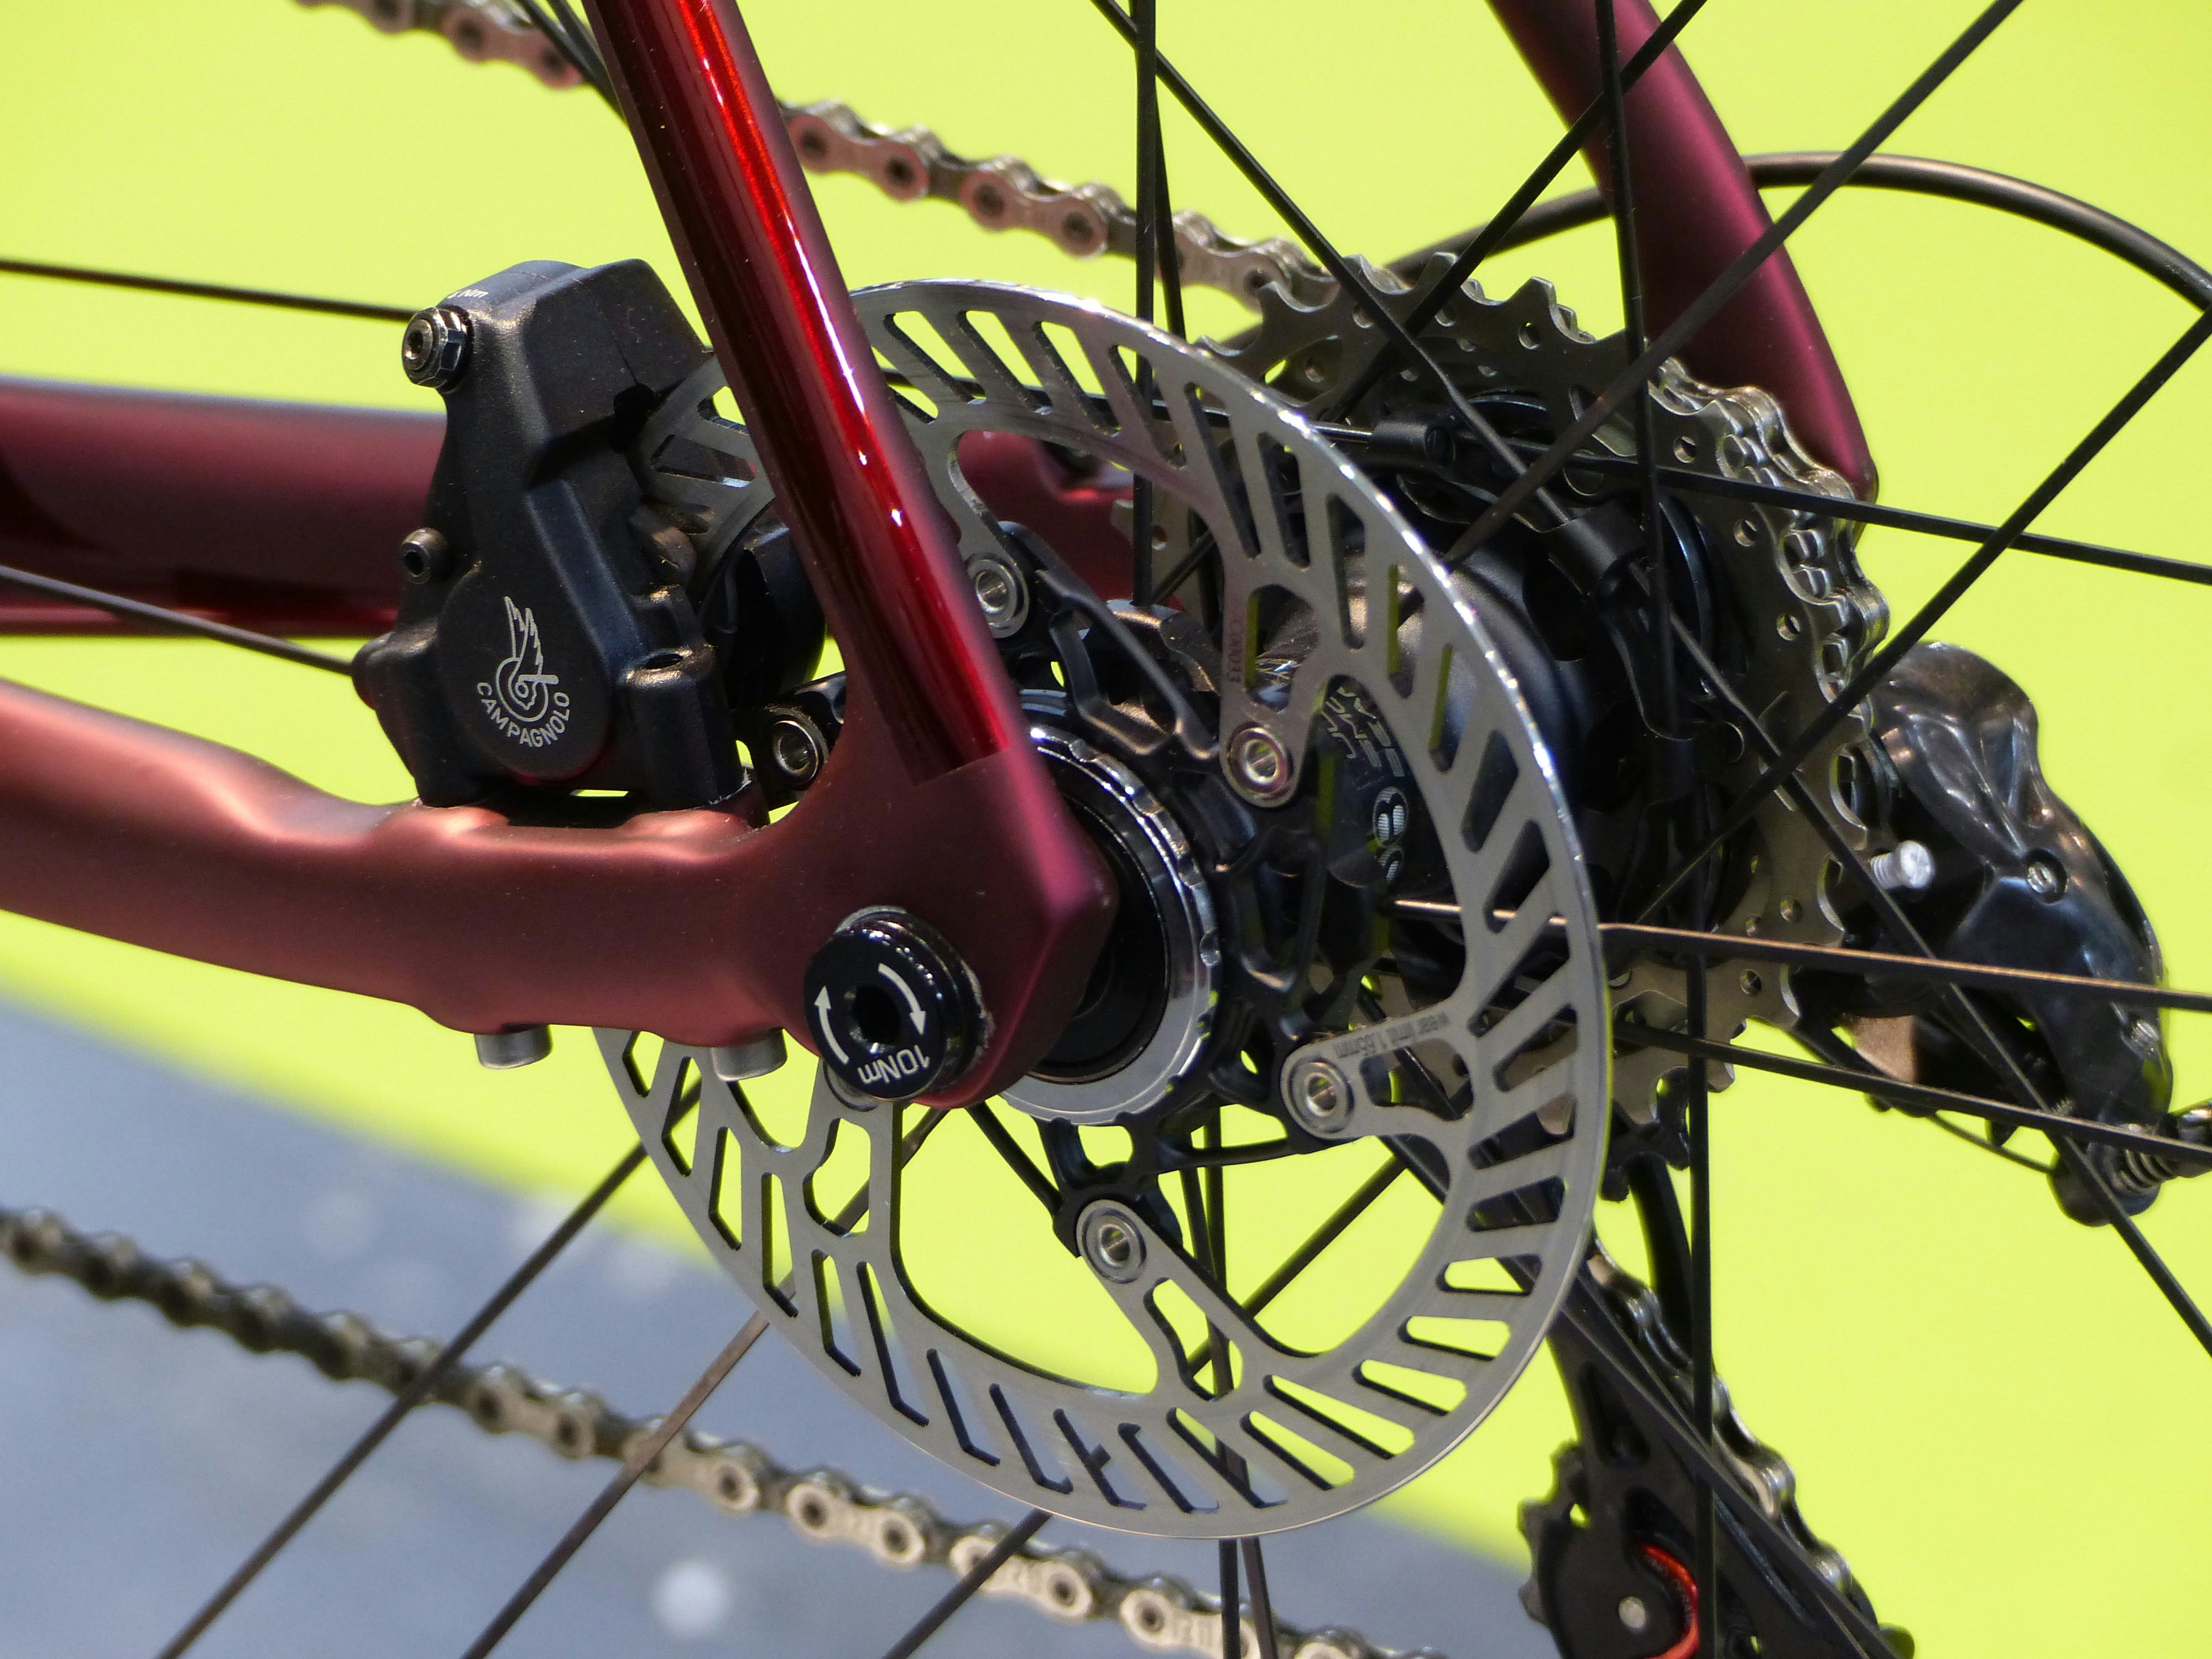 The use of disc brakes in competition has been a hot topic for several years. – Photo Bike Europe